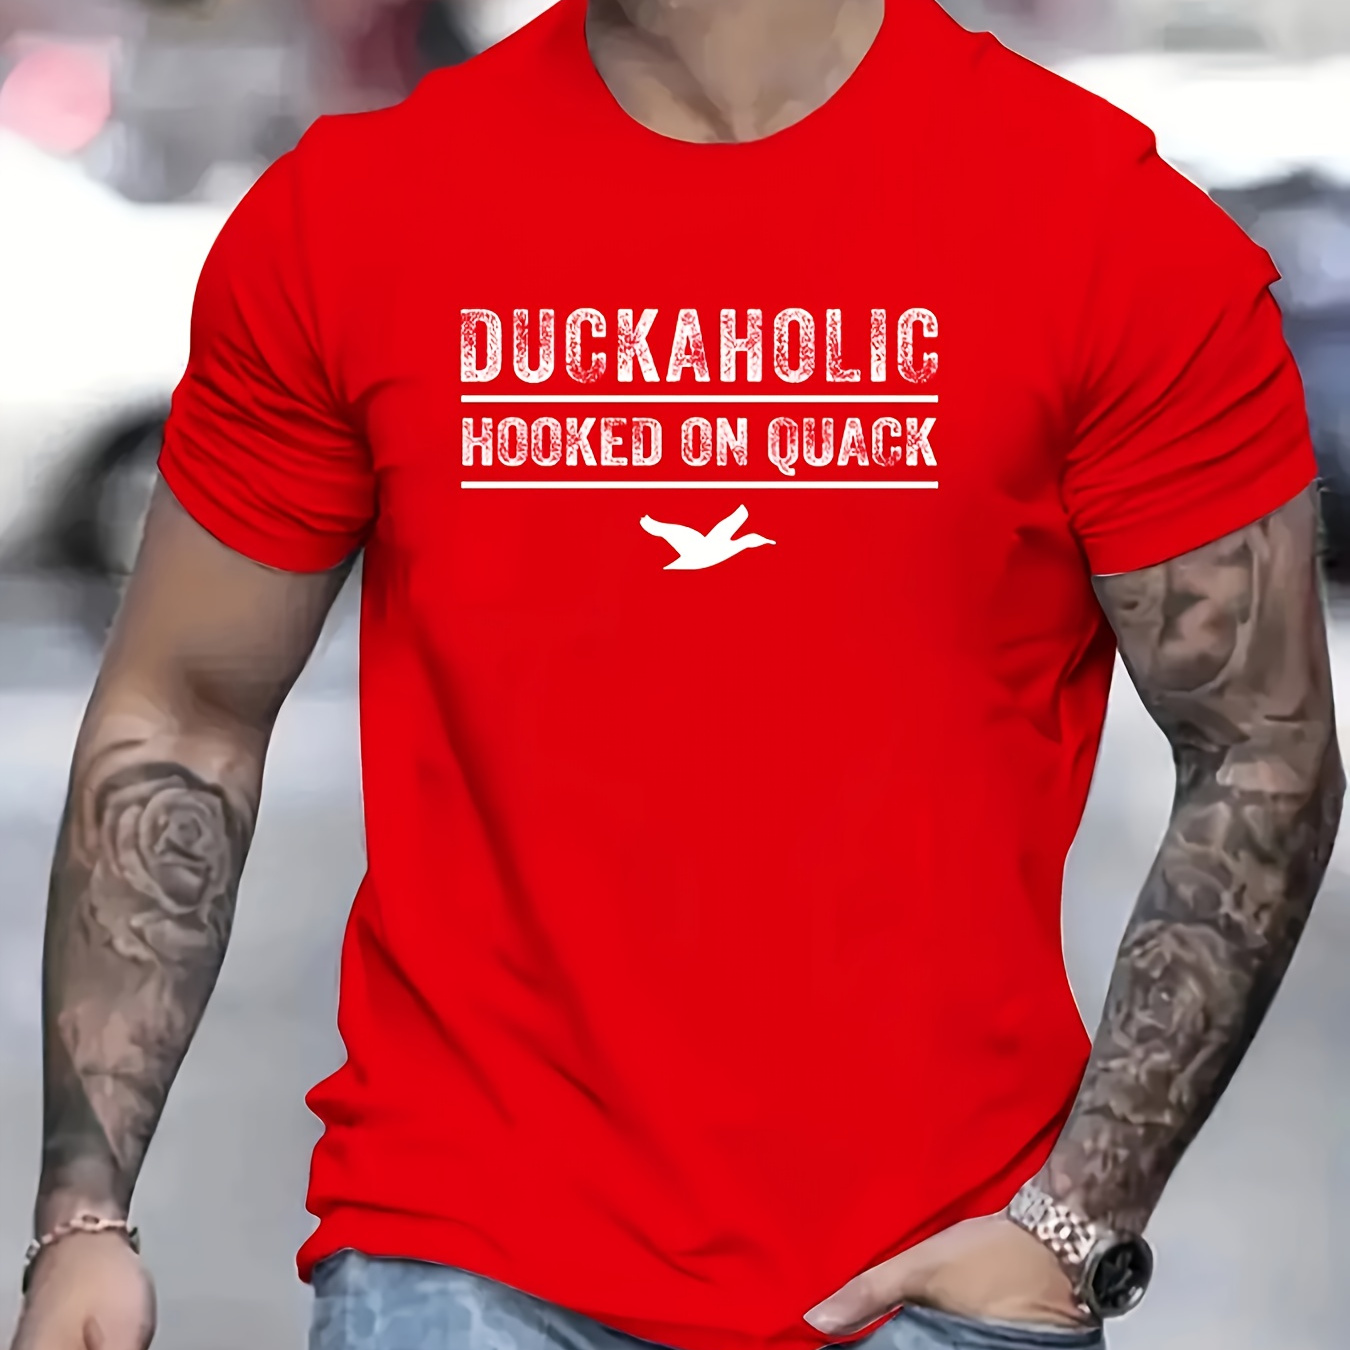 

Hooked On Quack Print T Shirt, Tees For Men, Casual Short Sleeve T-shirt For Summer